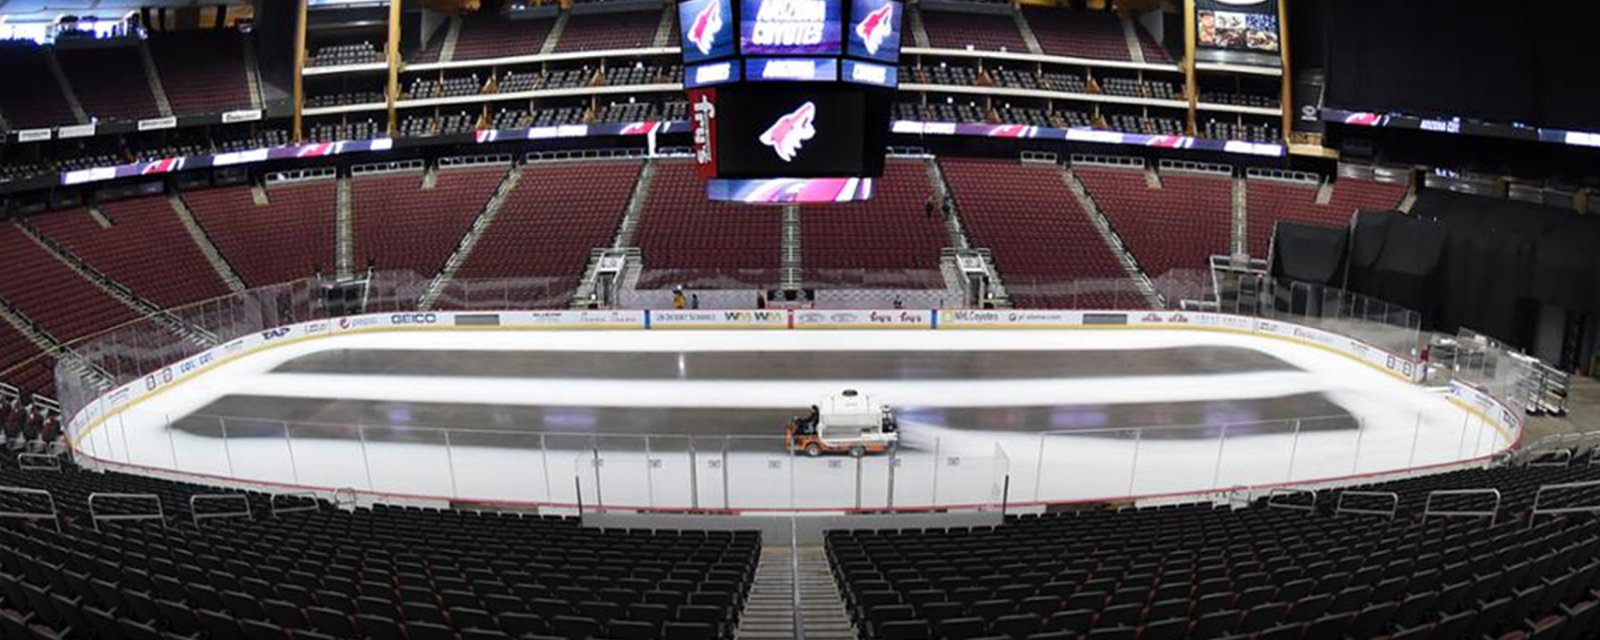 Breaking: NHL team forced to cancel games due to awful ice conditions